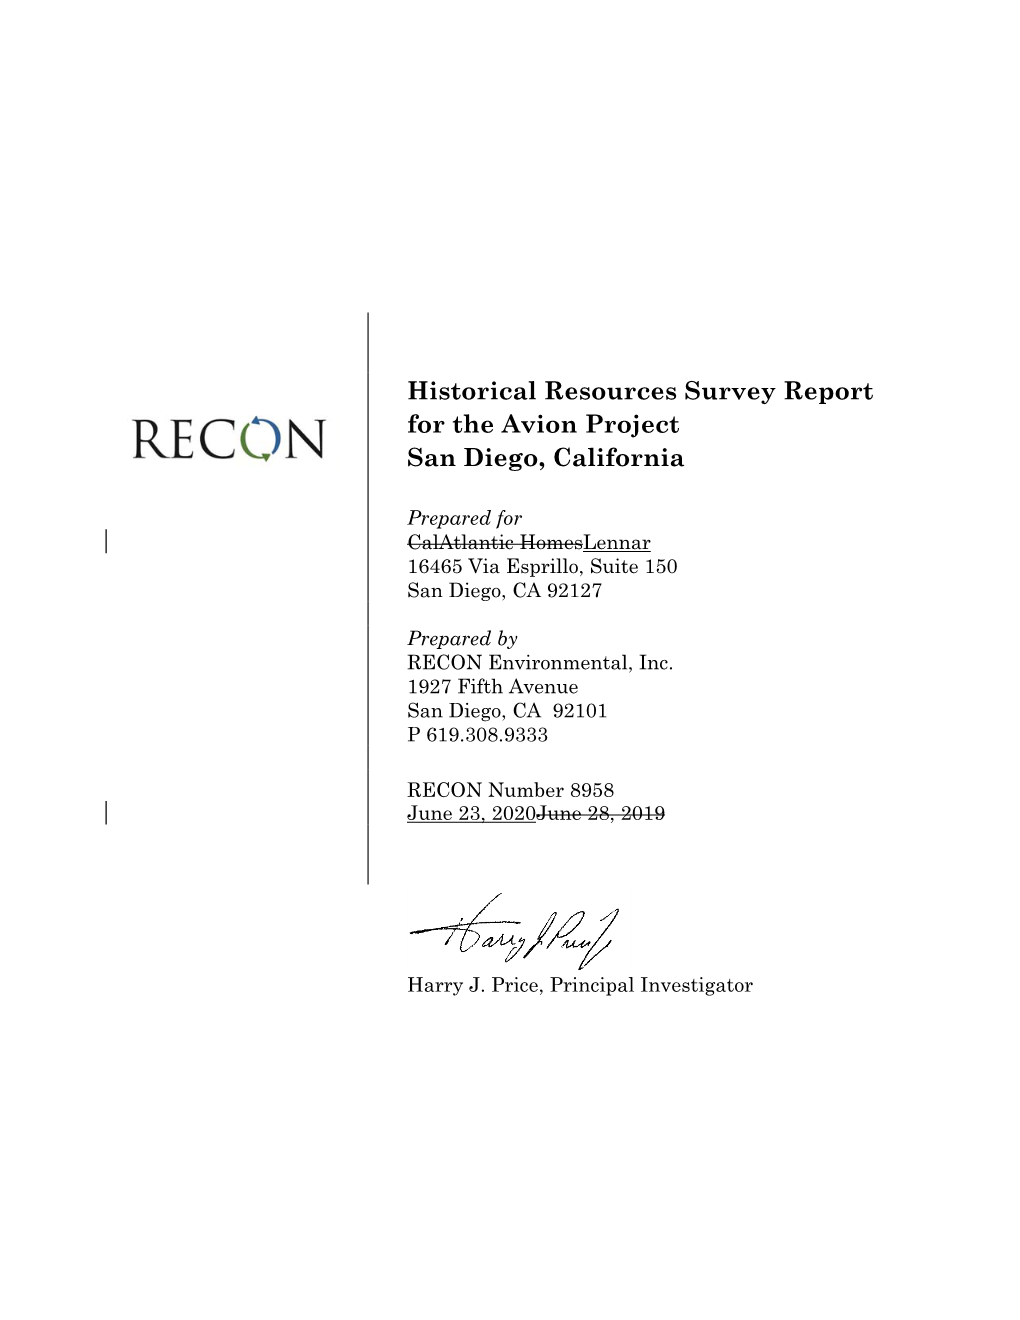 Historical Resources Survey Report for the Avion Project San Diego, California